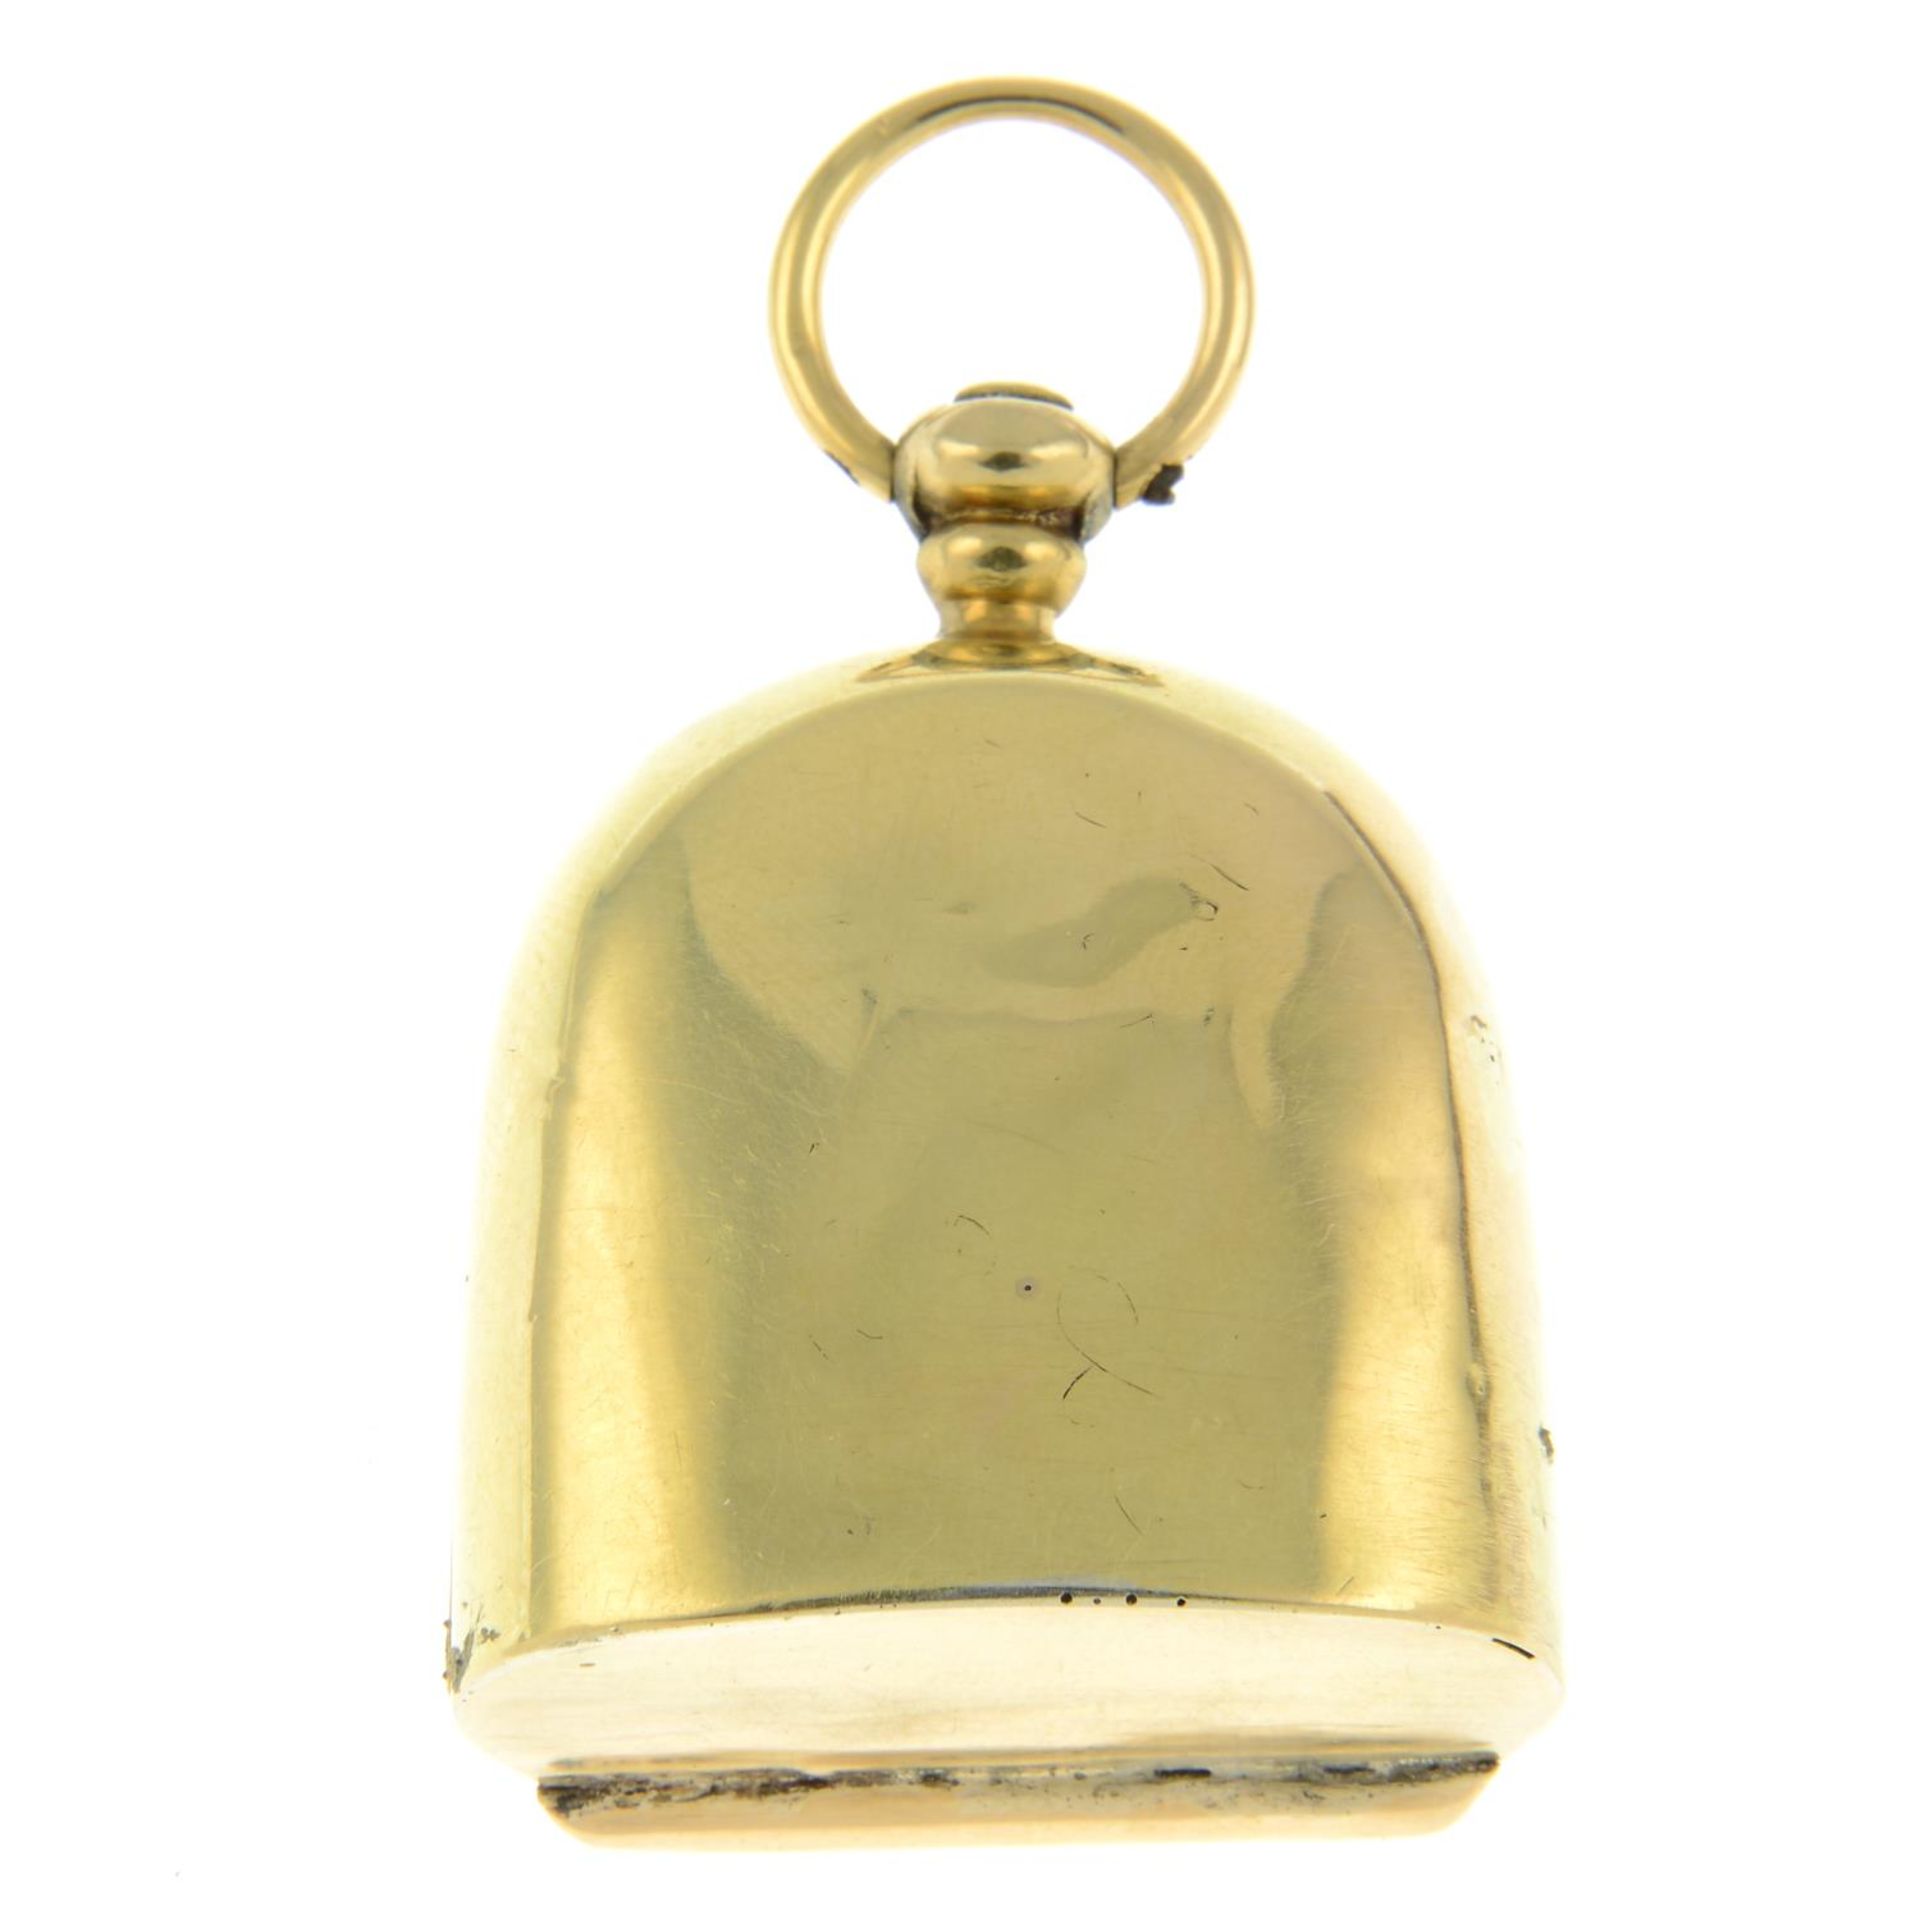 An early 20th century 18ct gold sovereign holder.Hallmarks for 18ct gold.Length 4.8cms. - Image 3 of 3